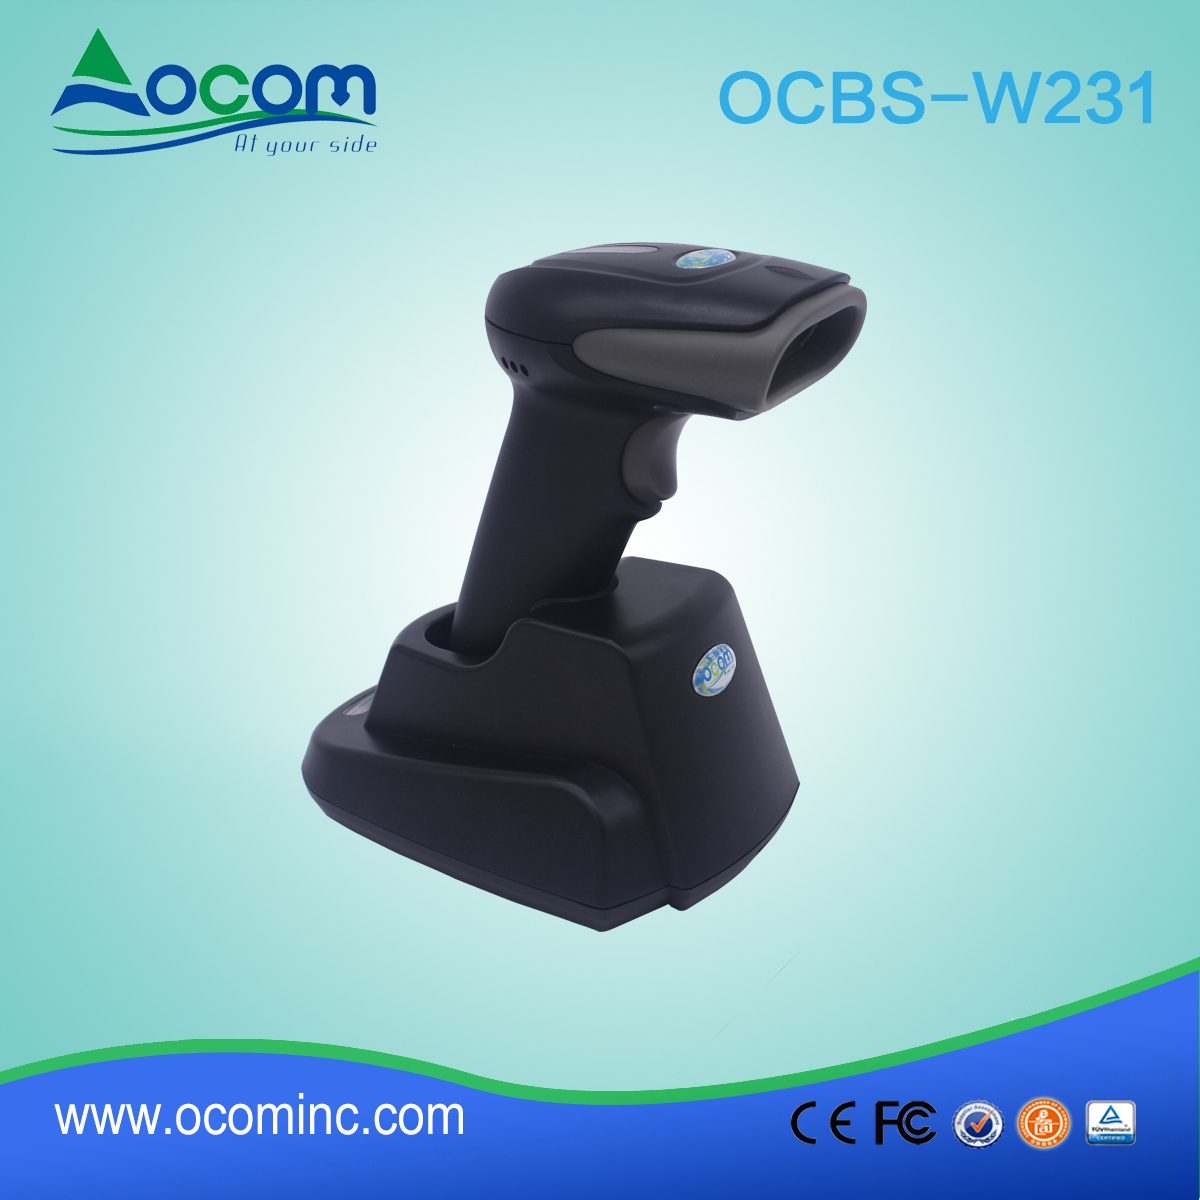 OCBS-W231Wireless Frequency USB Barcode Scanner Reader with Memory